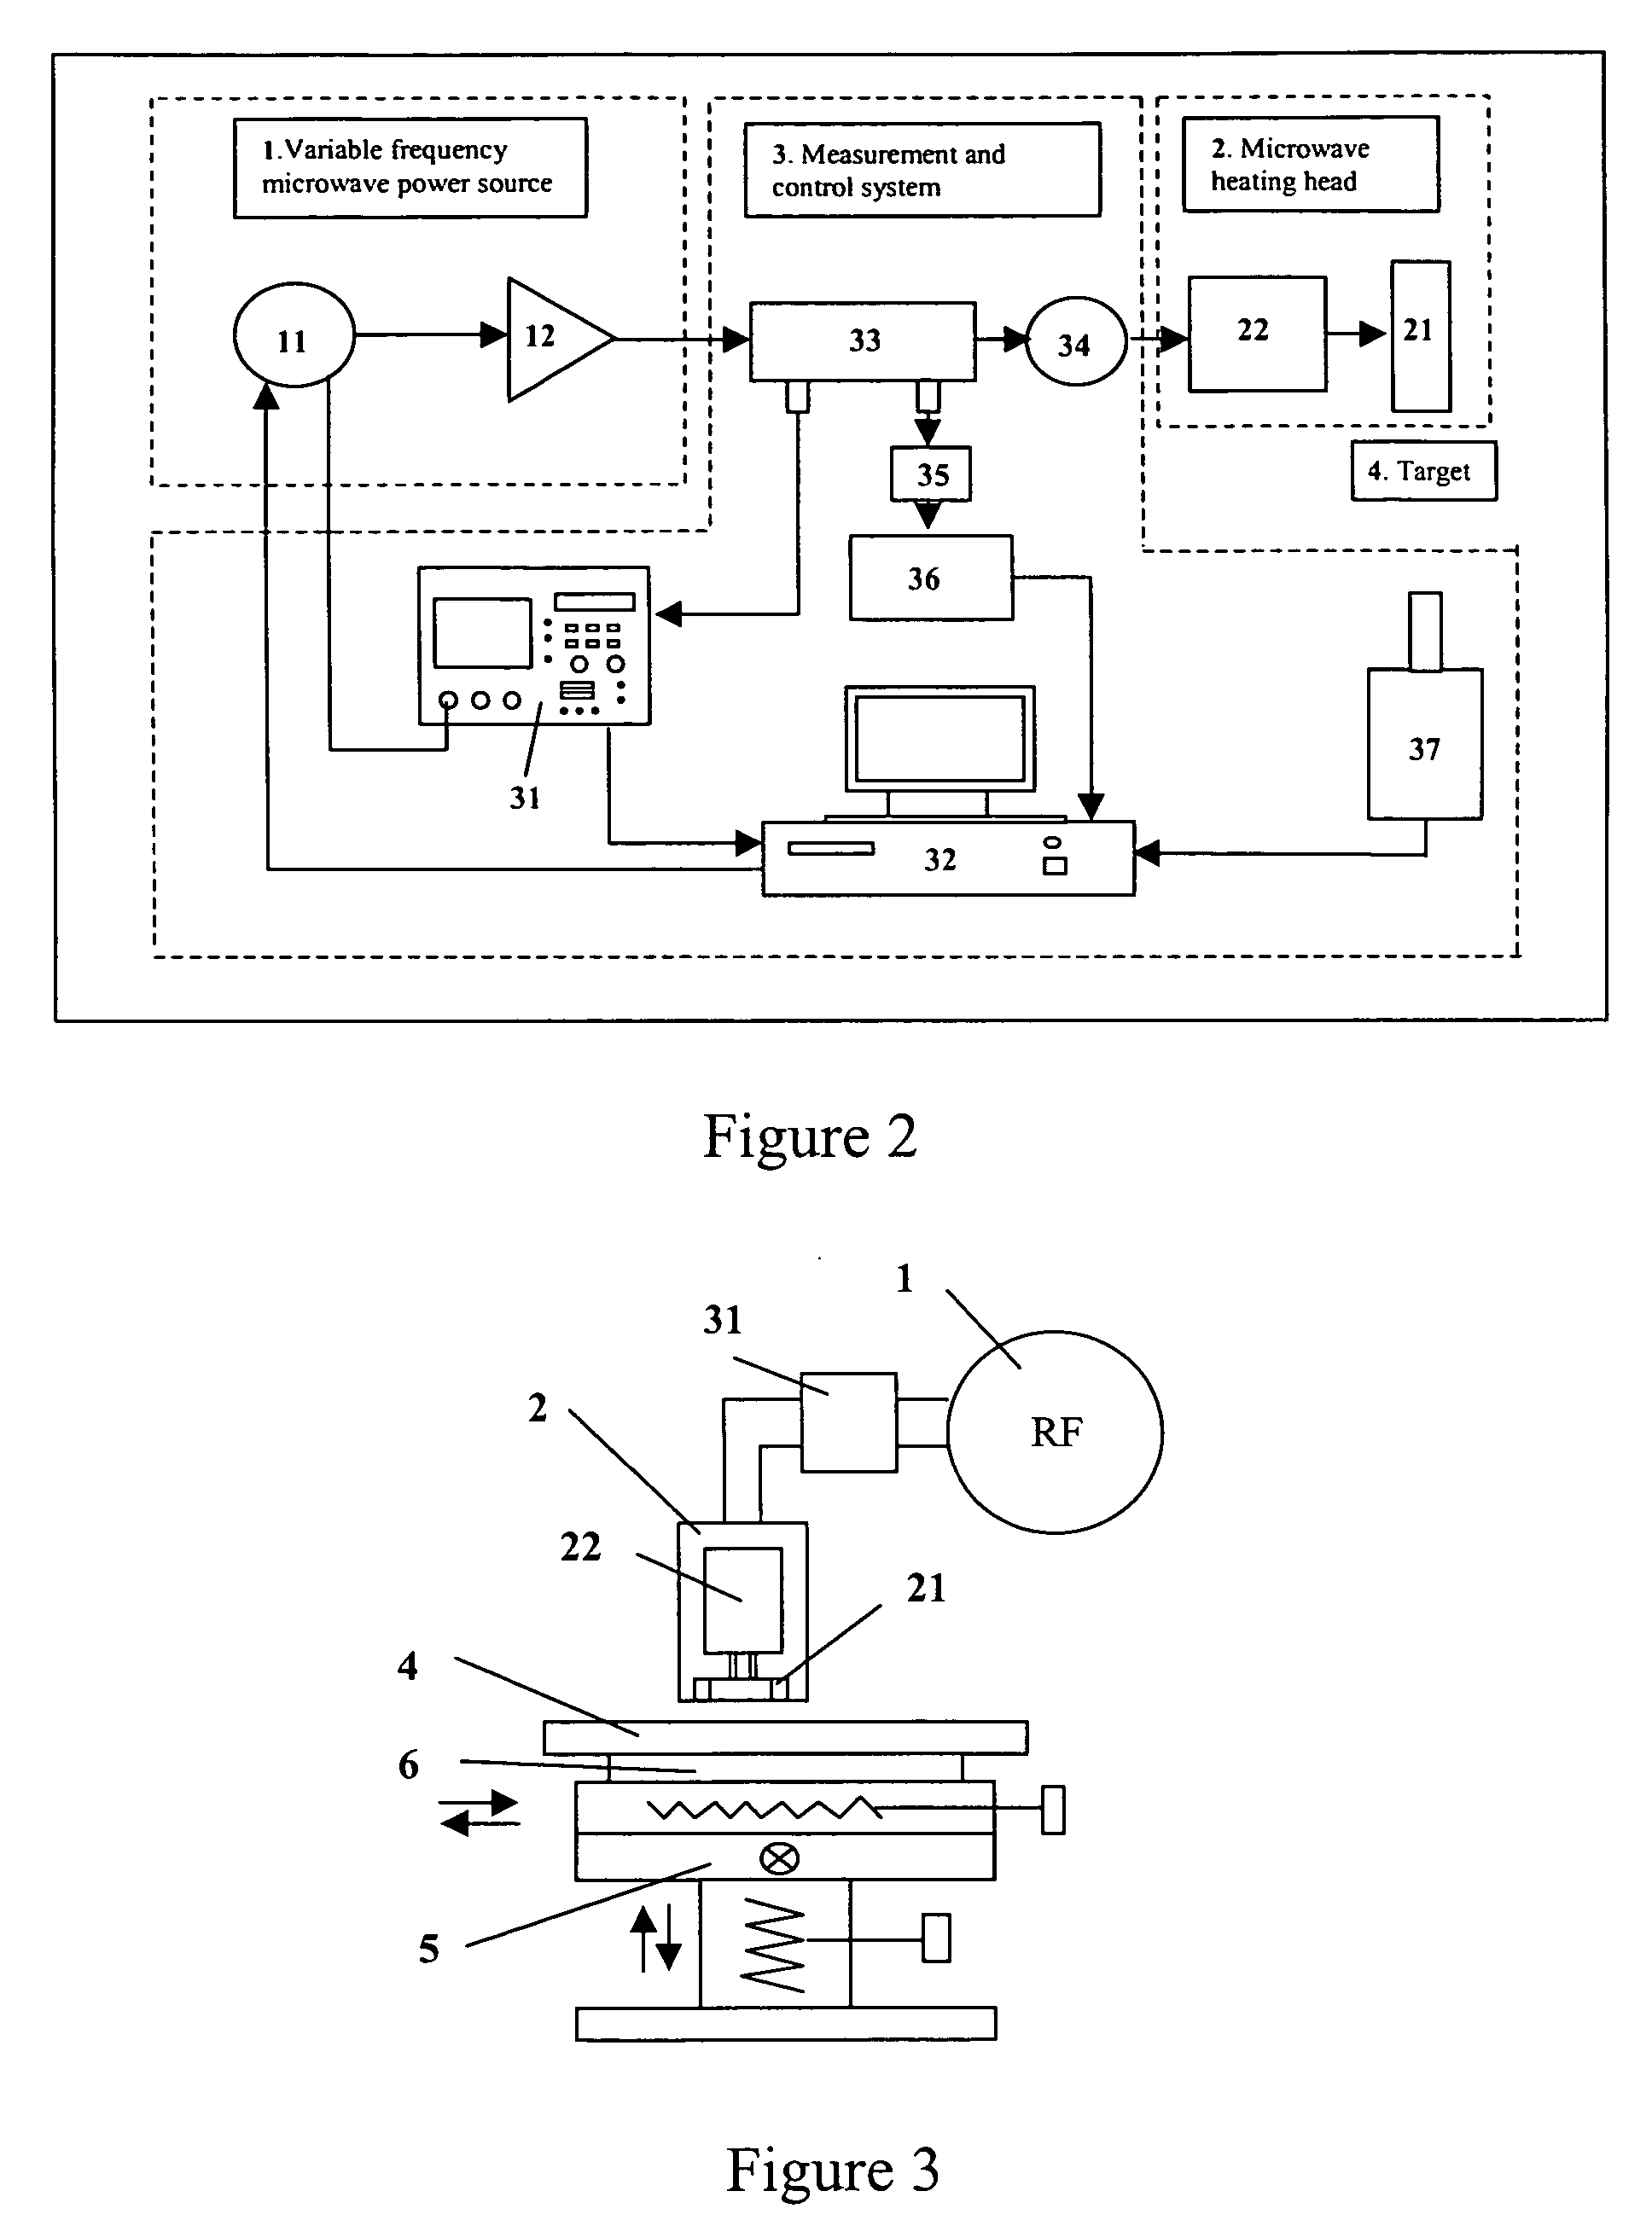 Method and apparatus for rapid thermal processing and bonding of materials using RF and microwaves